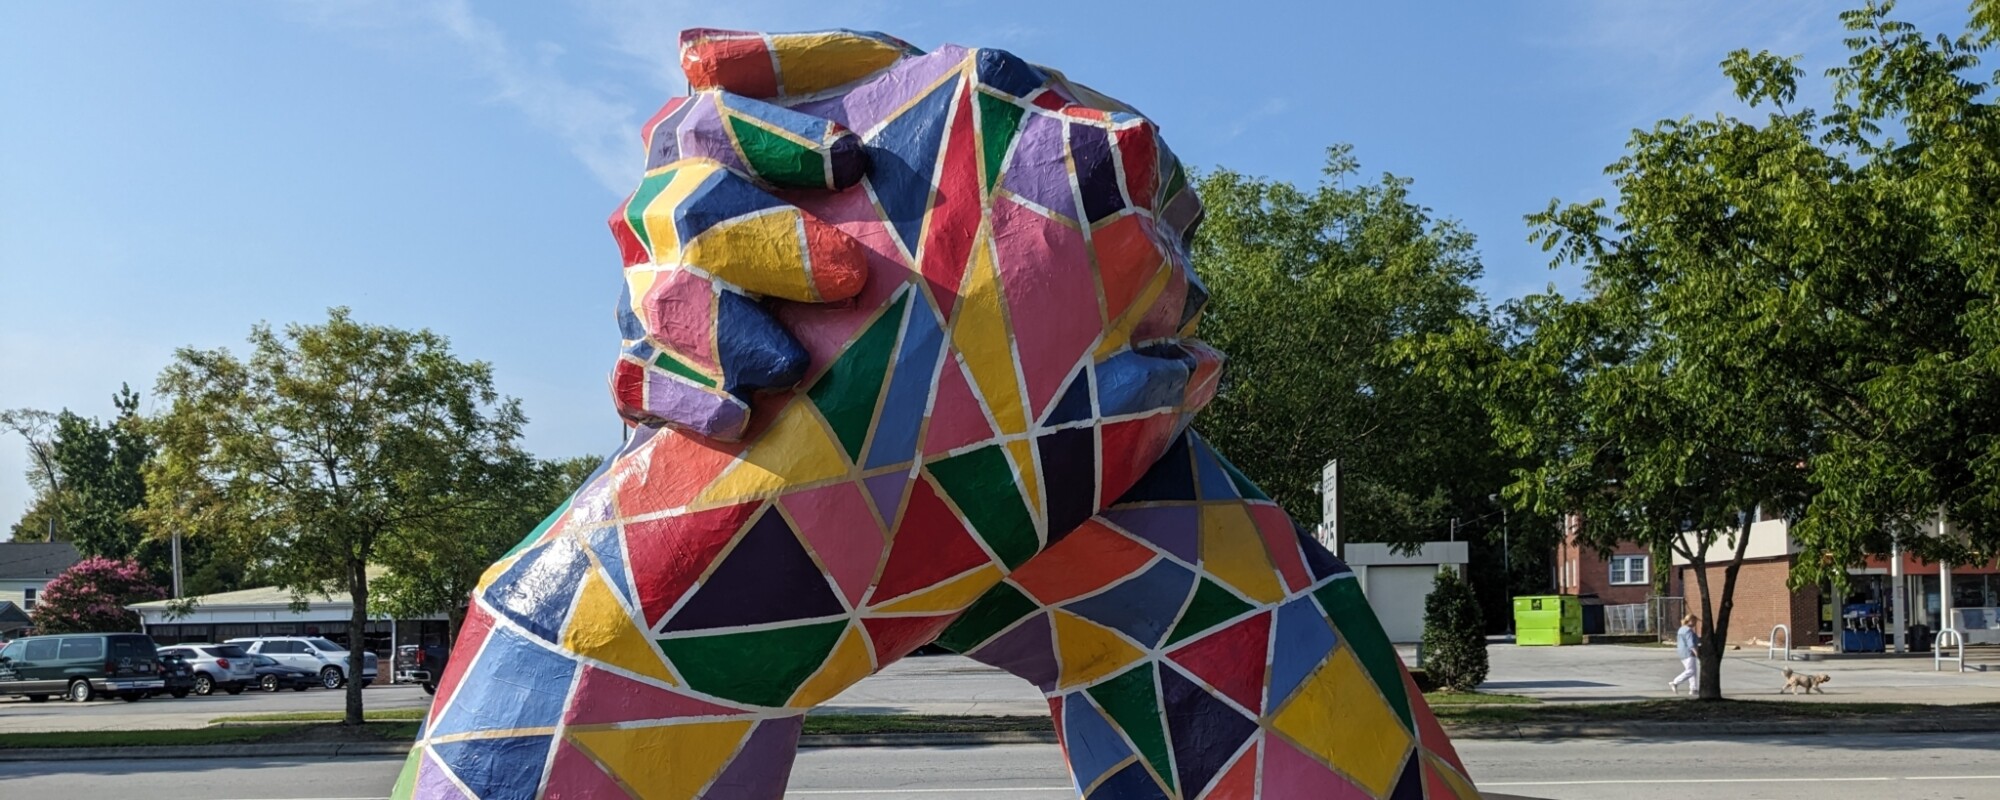 Large, multi-colored sculpture of hands rising up from the ground and clasping.